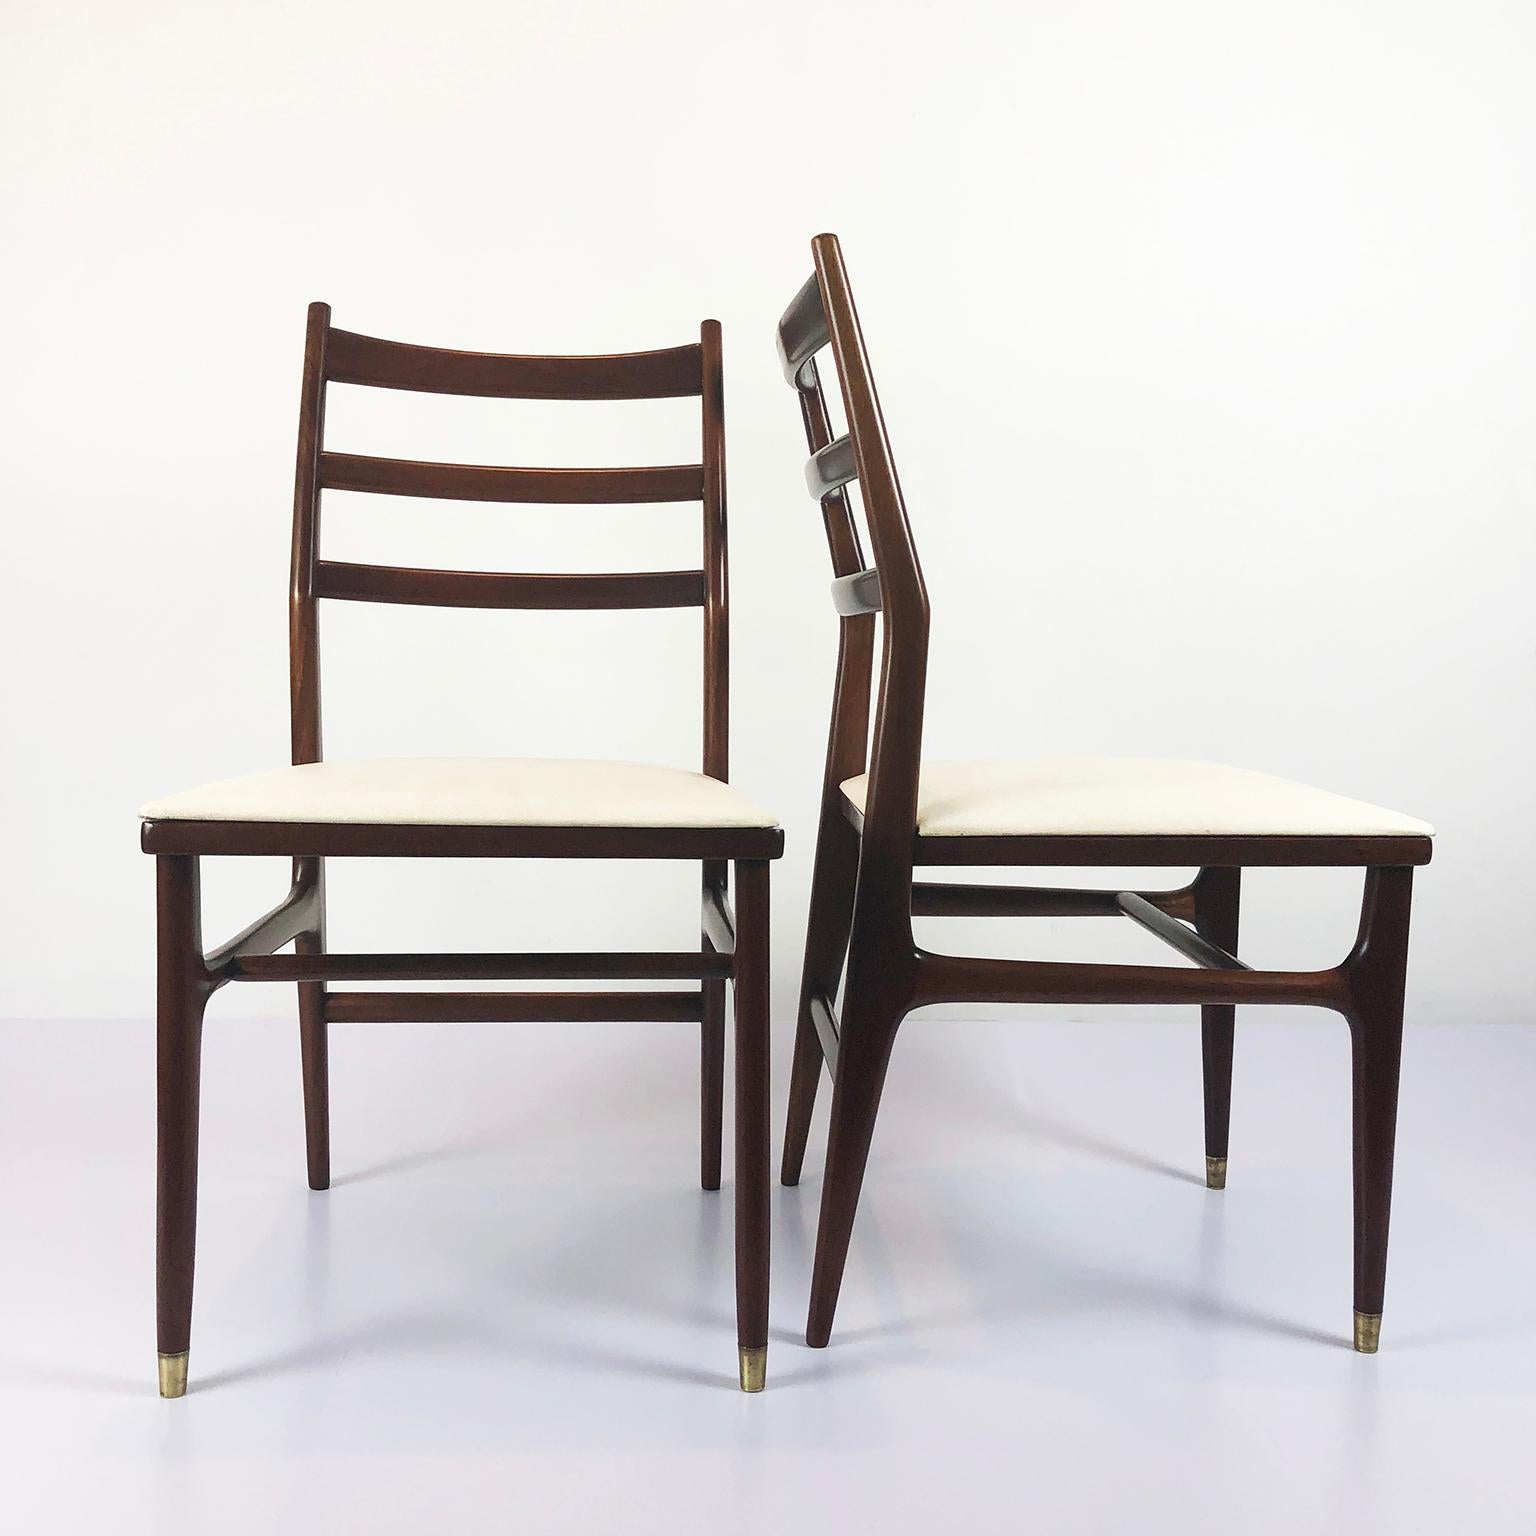 A set of four beautiful chairs in mahogany wood, circa 1960s, in the style of Gio Ponti or Cassina Leggera. In excellent condition.